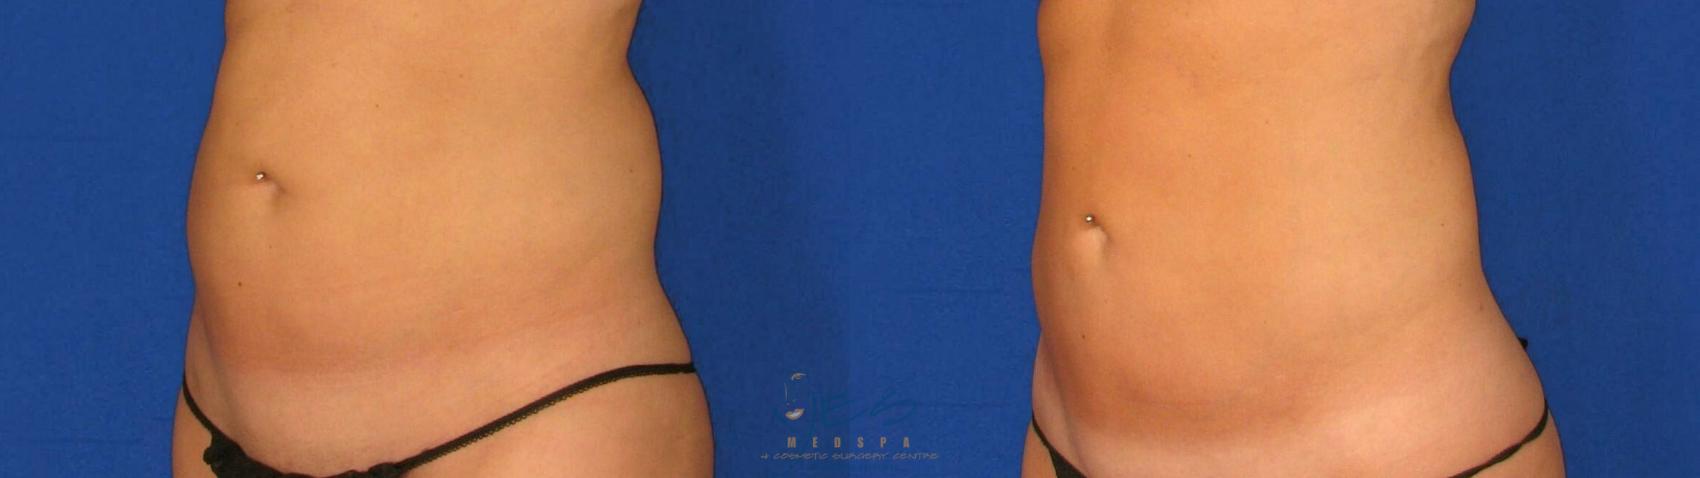 Before & After Liposuction Case 71 Left Oblique View in Vancouver, BC